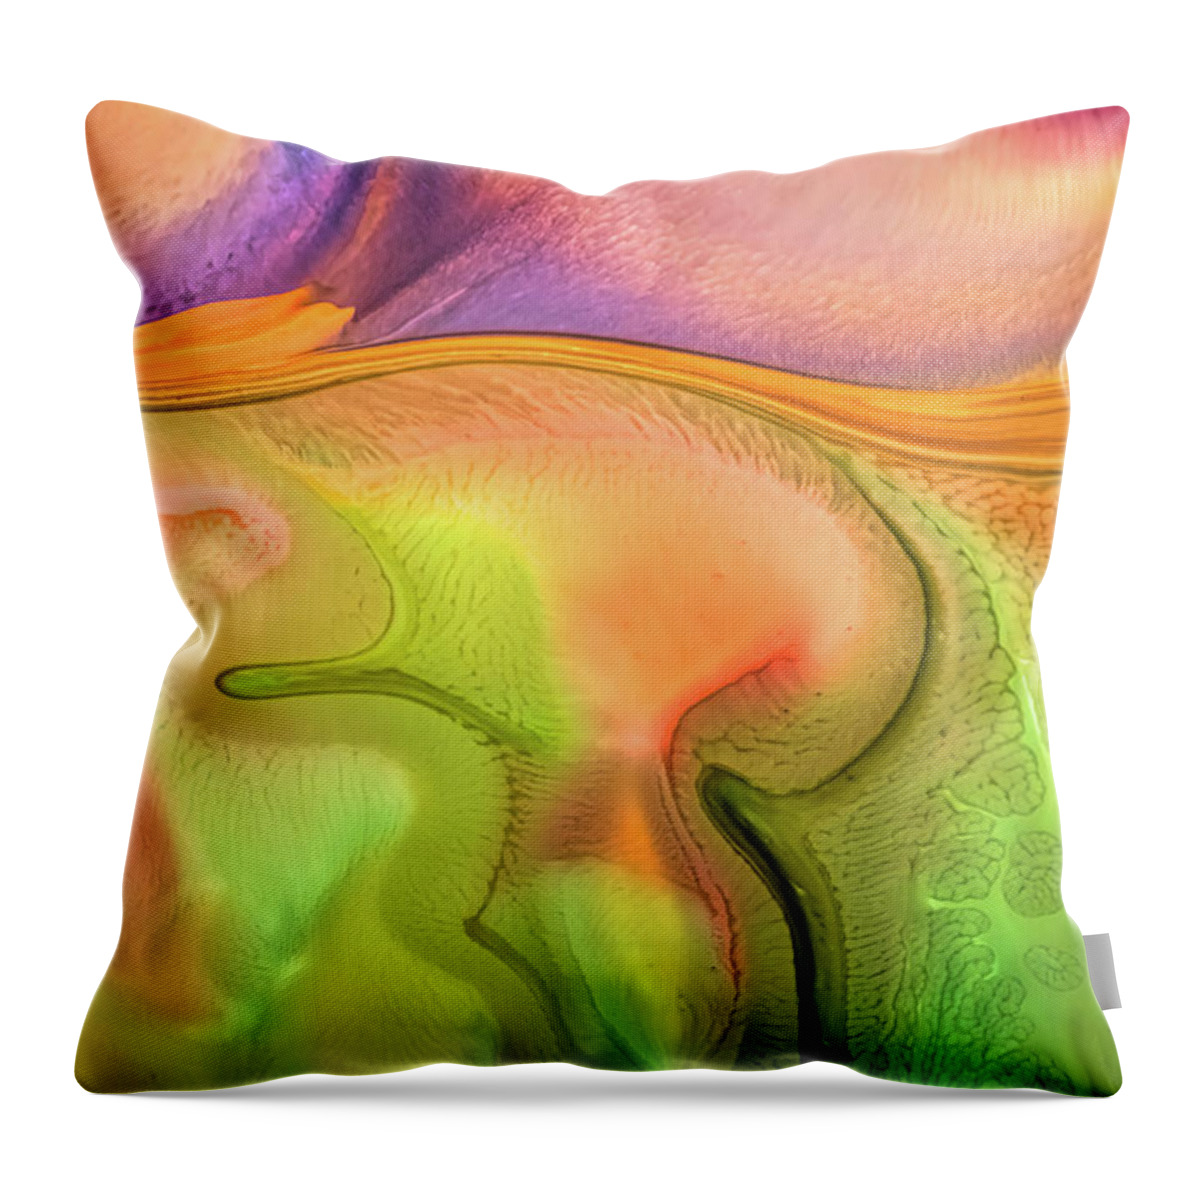 Abstract Art Throw Pillow featuring the mixed media Contemporary abstract 4 by Lilia S